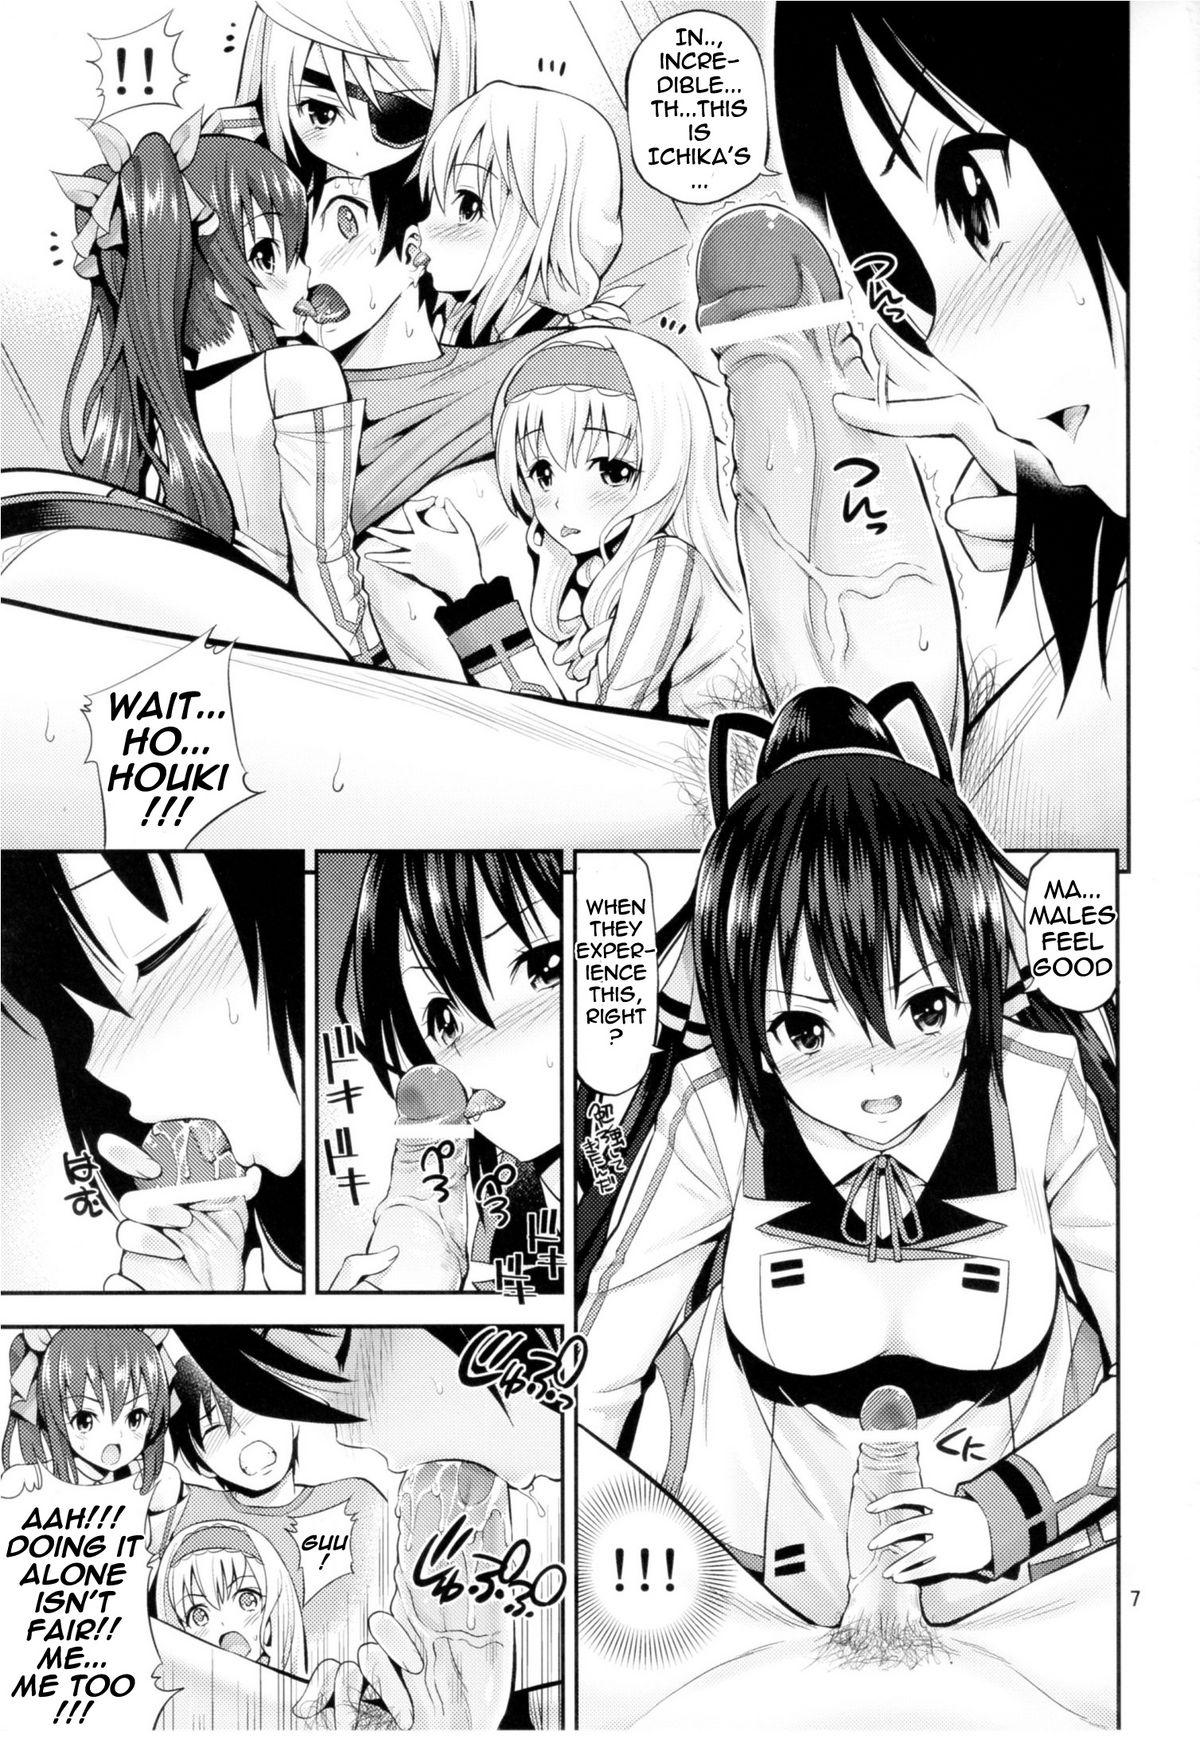 Oral Sex Porn This is Harlem - Infinite stratos Licking Pussy - Page 6